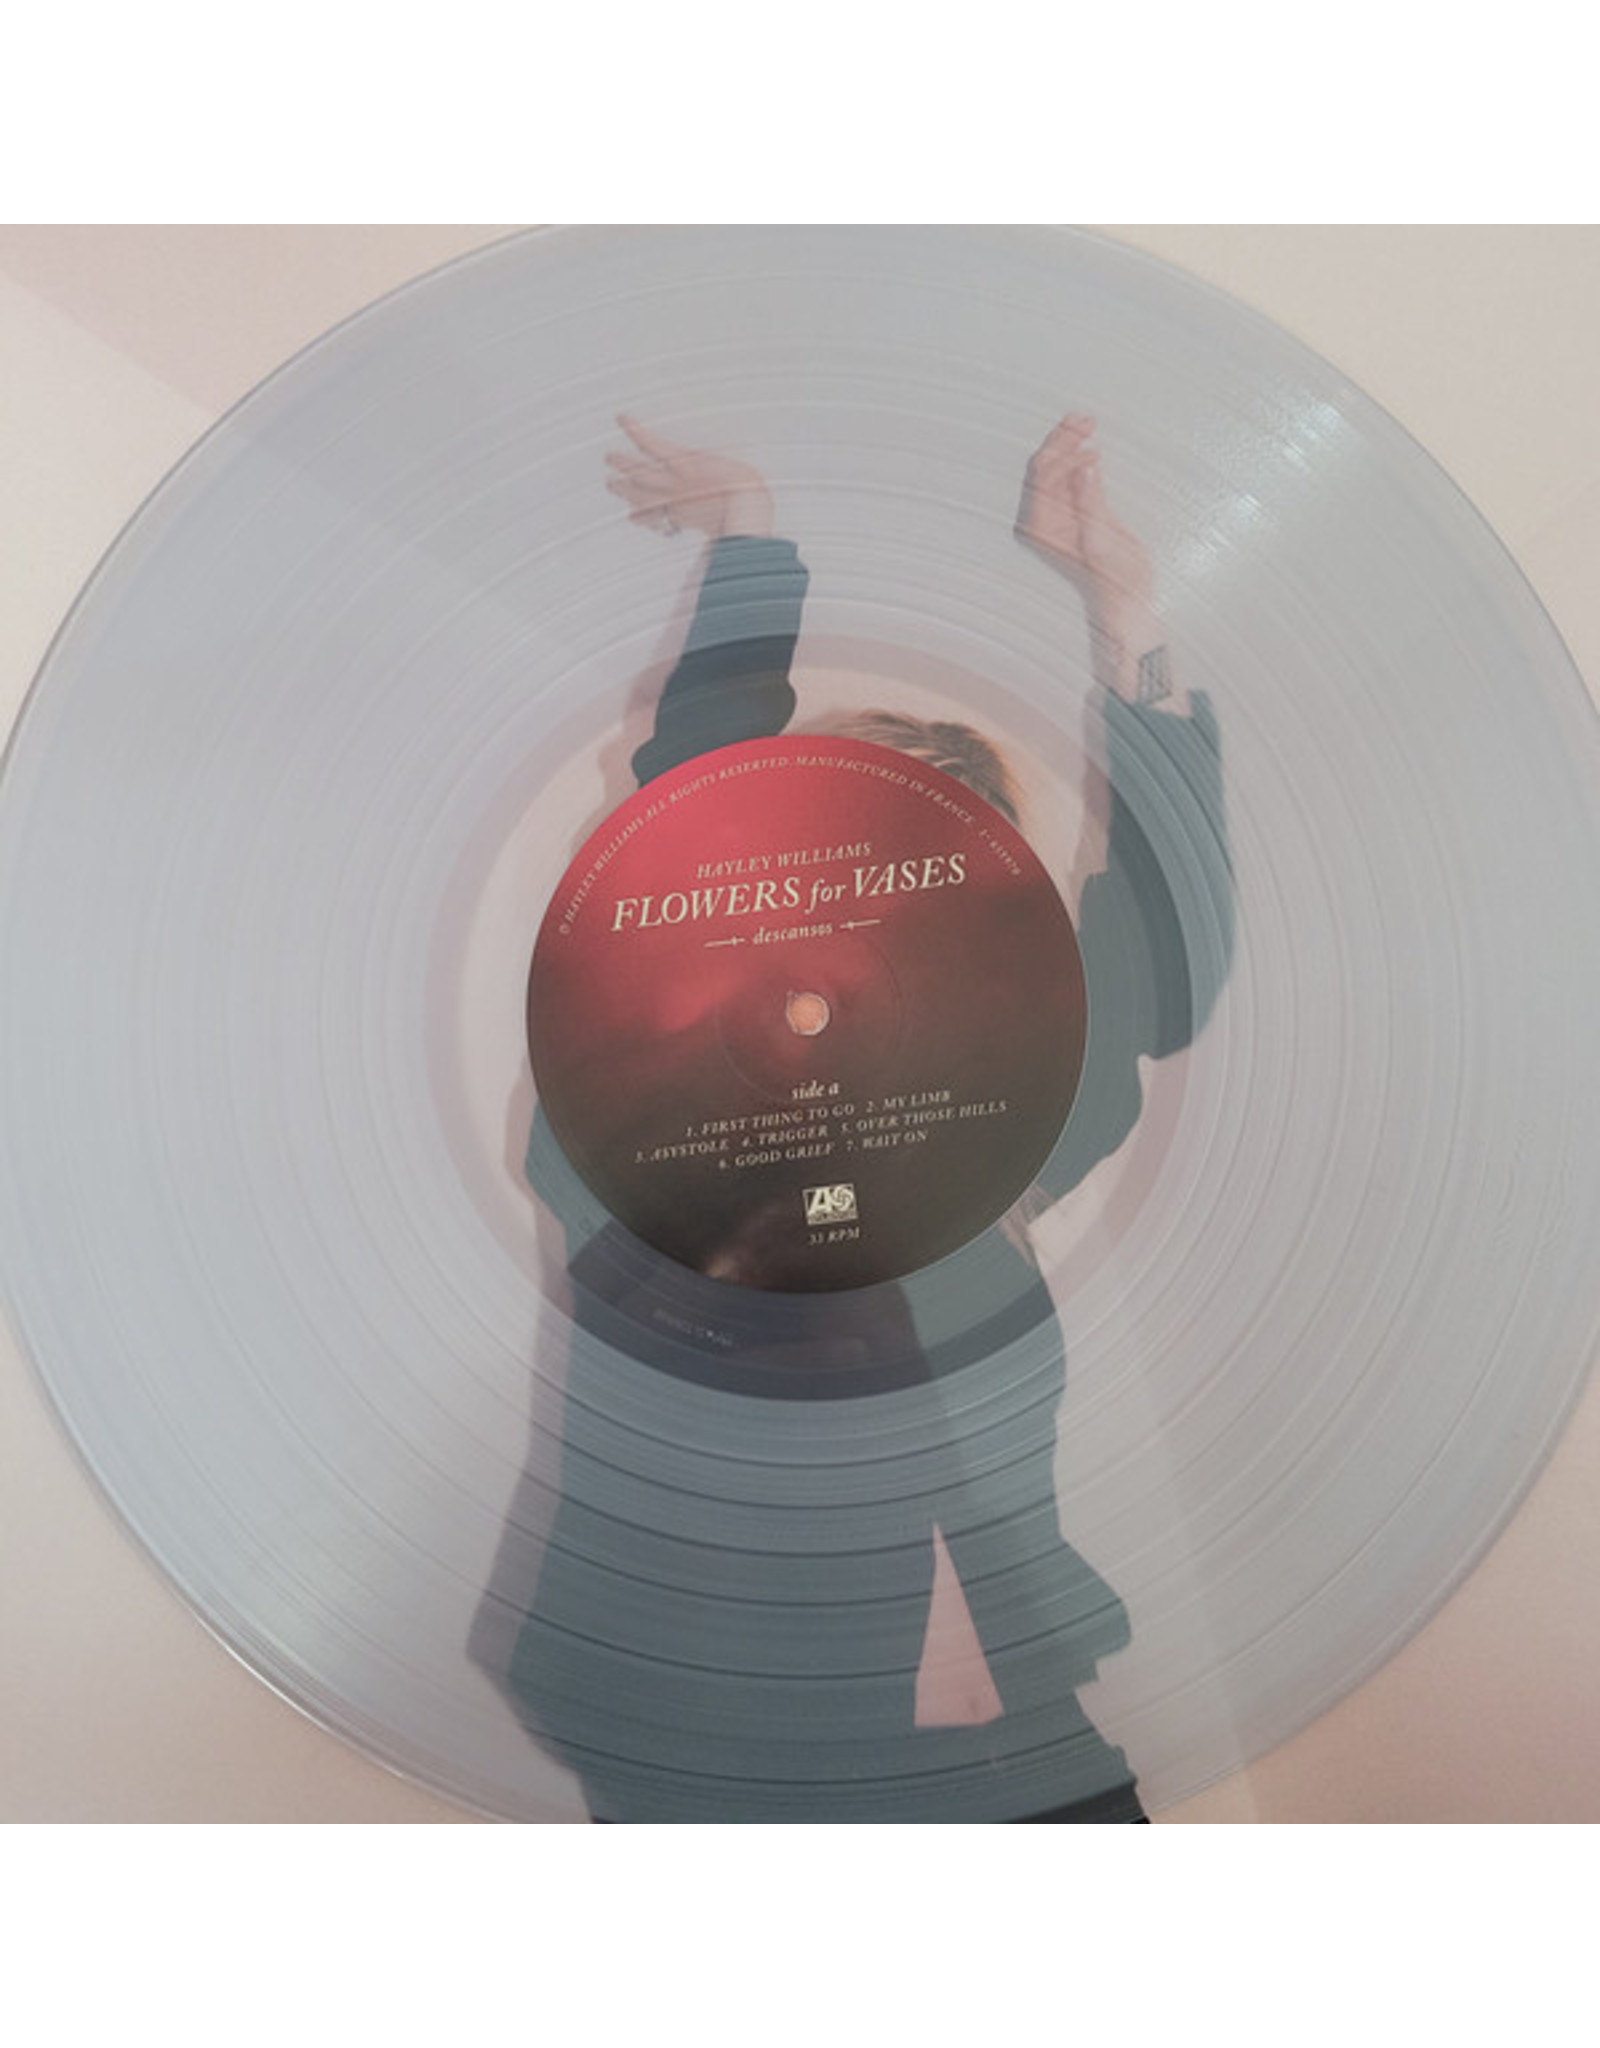 Hayley Williams - Flowers For Vases / Descansos (Exclusive Clear Vinyl)